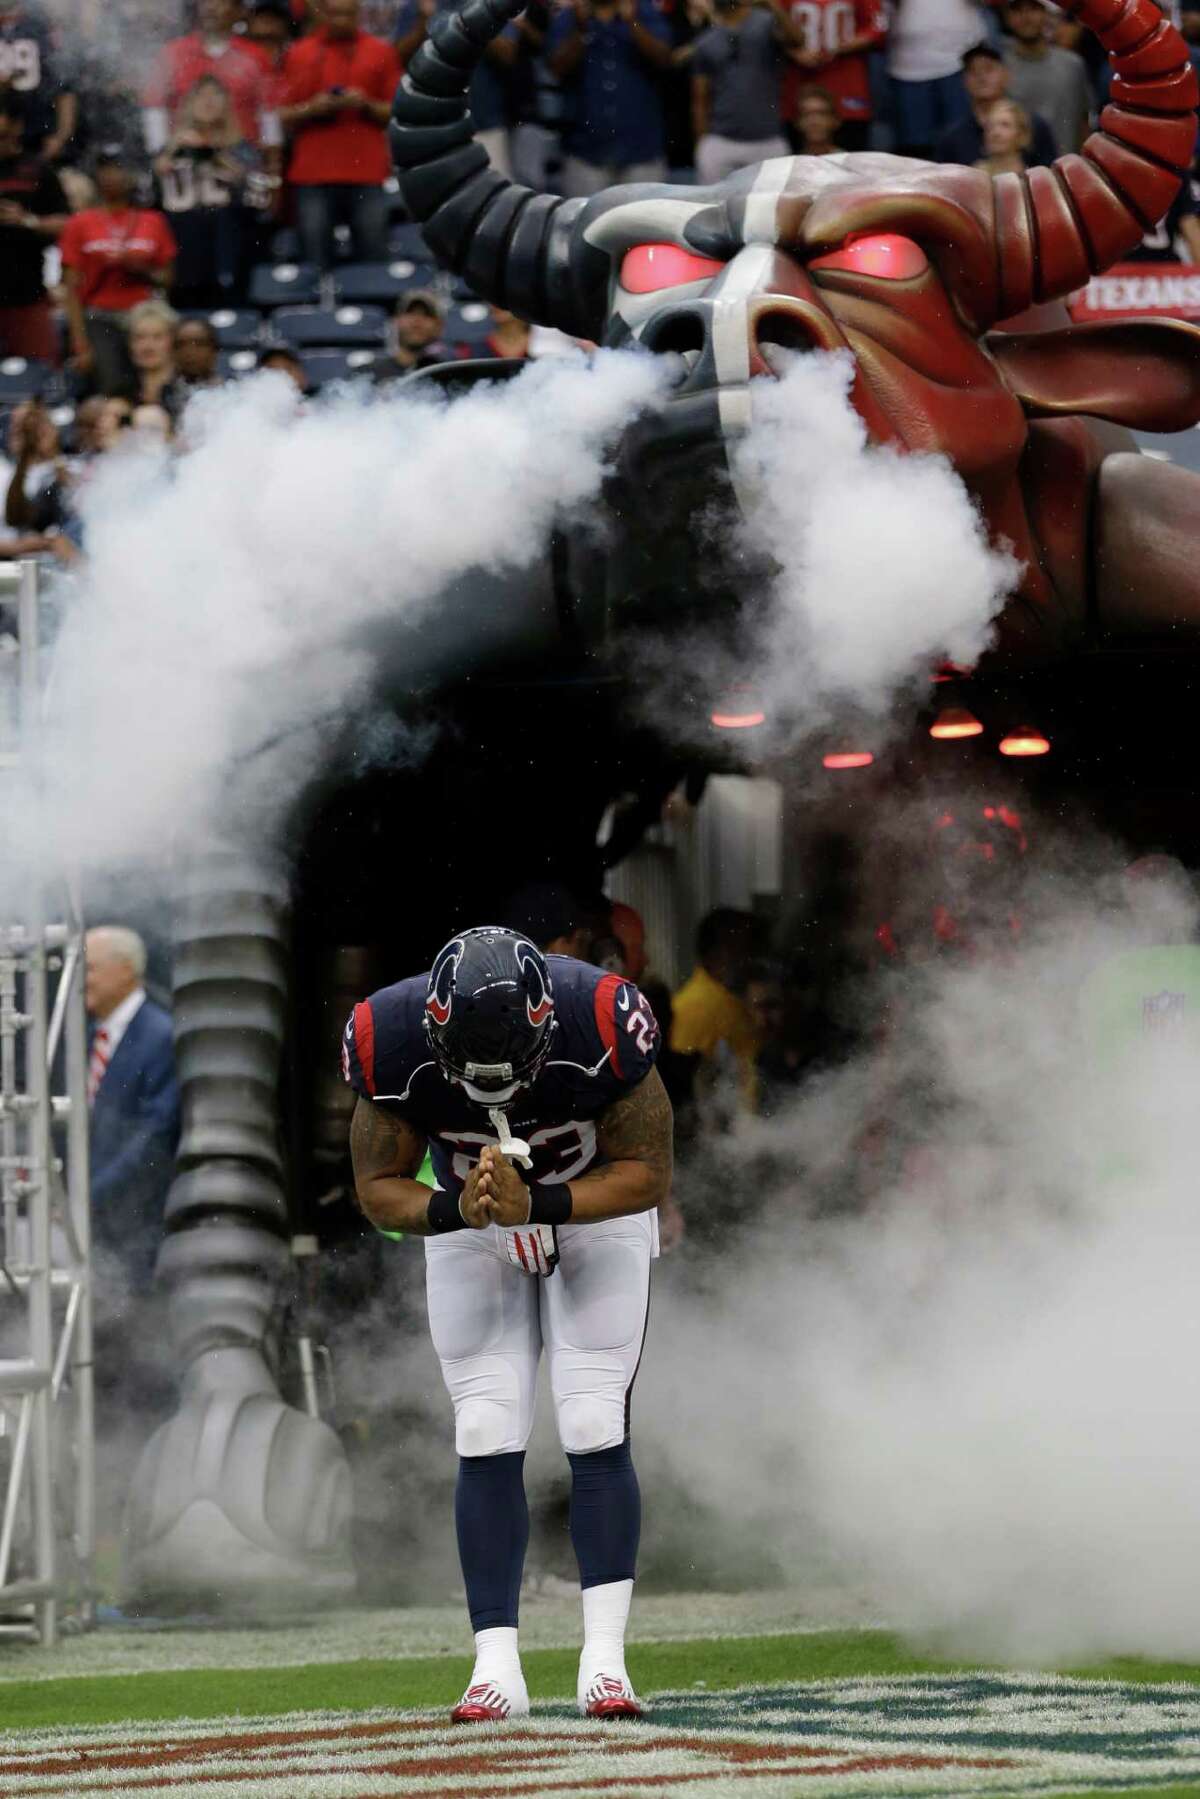 Houston Texans running back Arian Foster (23) is introduces before an NFL football game against the Seattle Seahawks Sunday, Sept. 29, 2013, in Houston. (AP Photo/David J. Phillip)